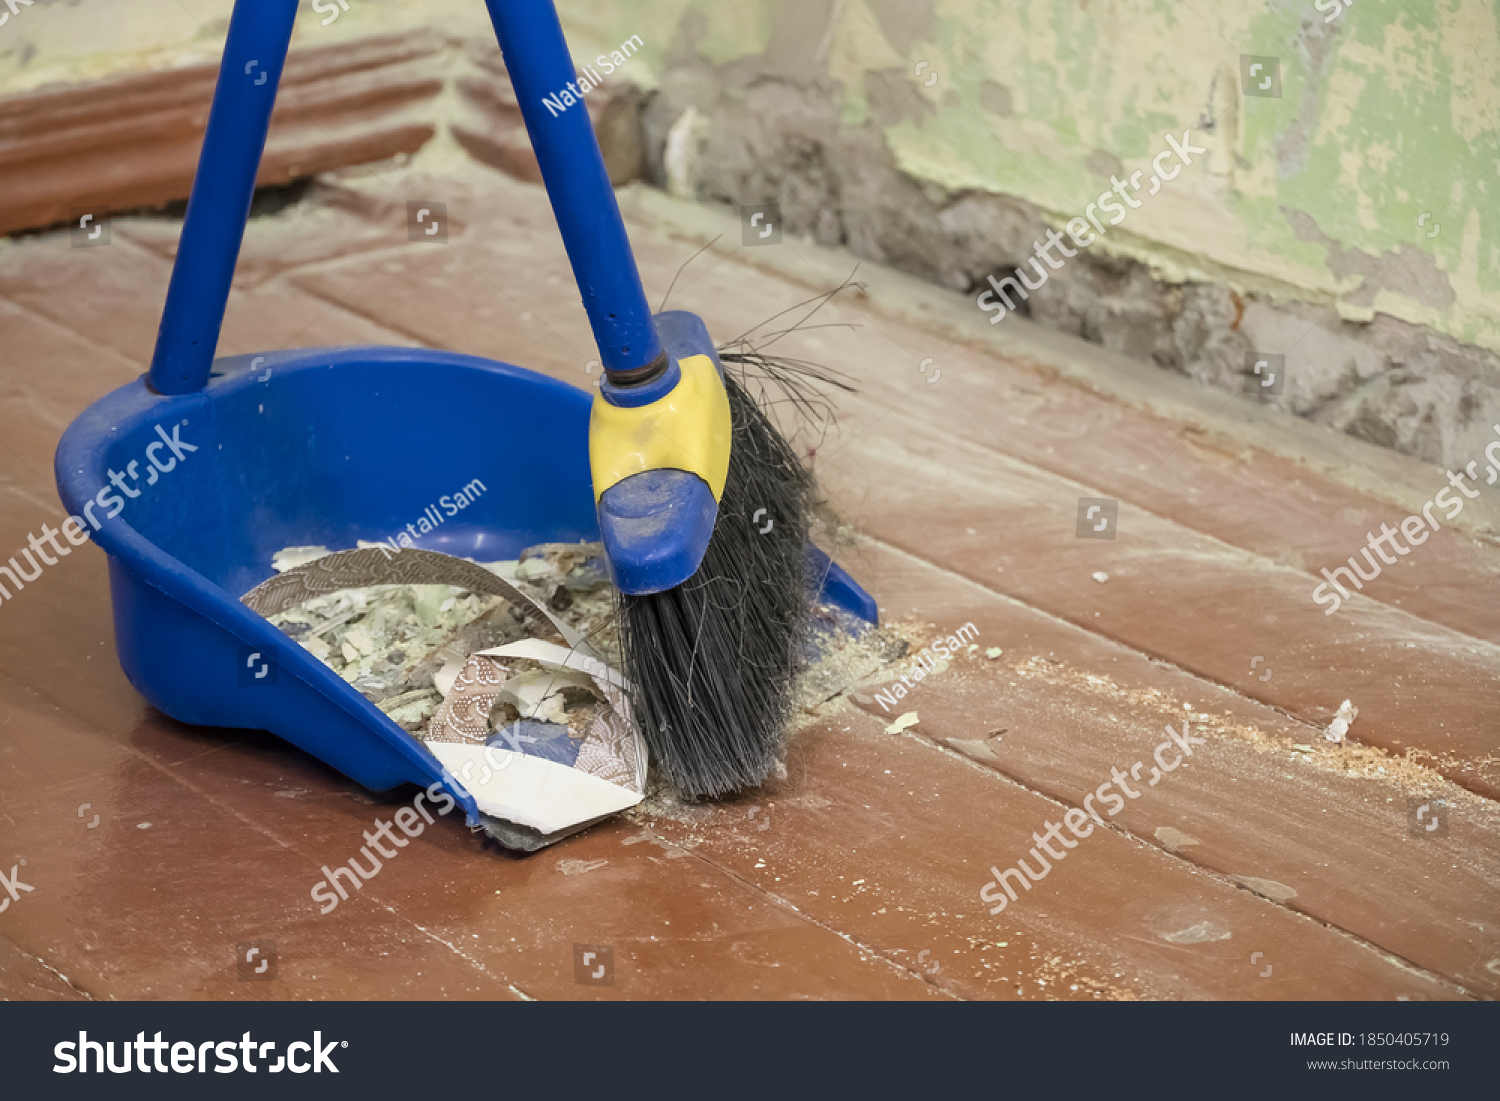 Clean up after repairs. Sweep up construction debris with a brush in a dustpan. Sweeping at home. Tools for cleaning the house. Make home repairs. The dust and debris after the renovation. #1850405719